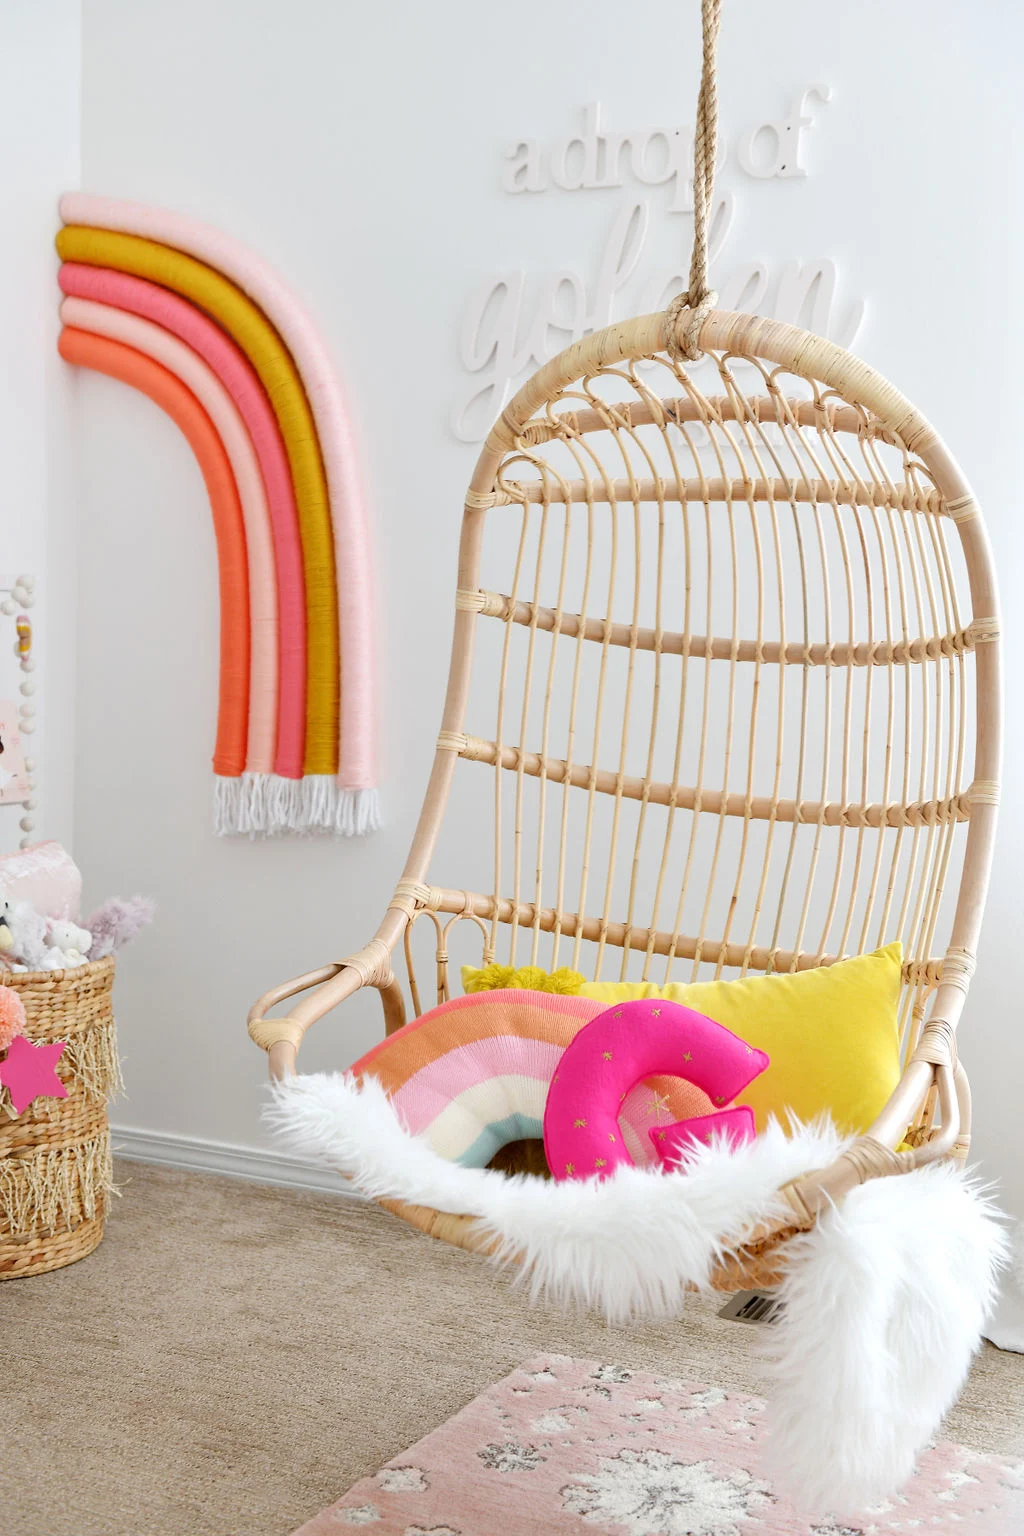 Rattan Chair in Baby Girl Room